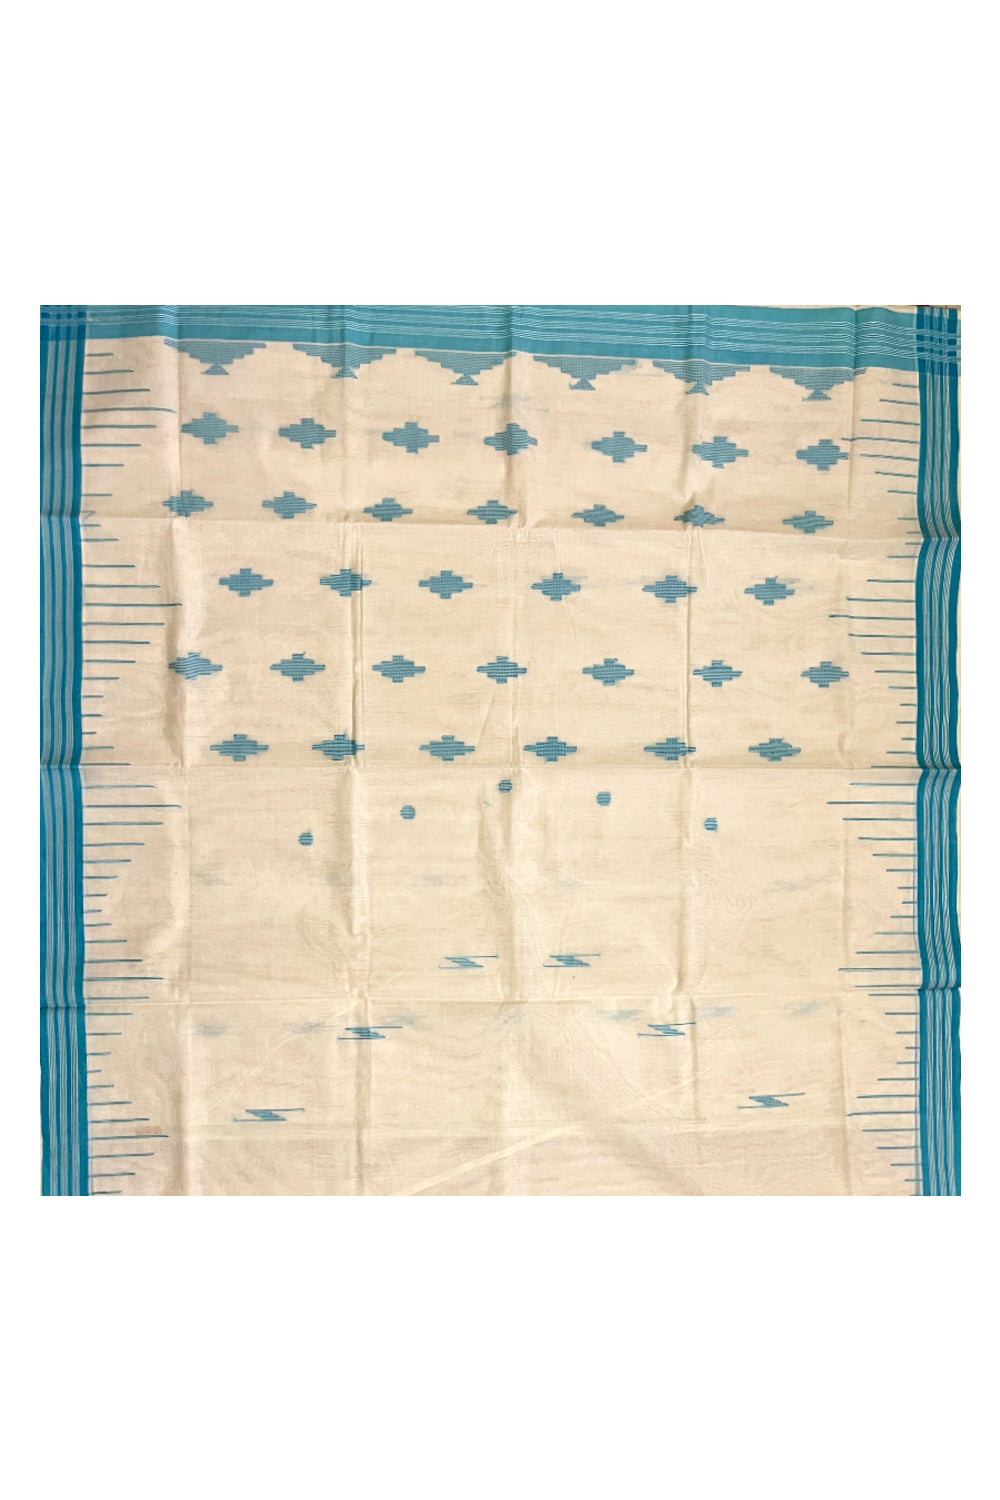 Southloom Kuthampully Handloom Onam 2023 Saree with Turquoise Border and Butta Works